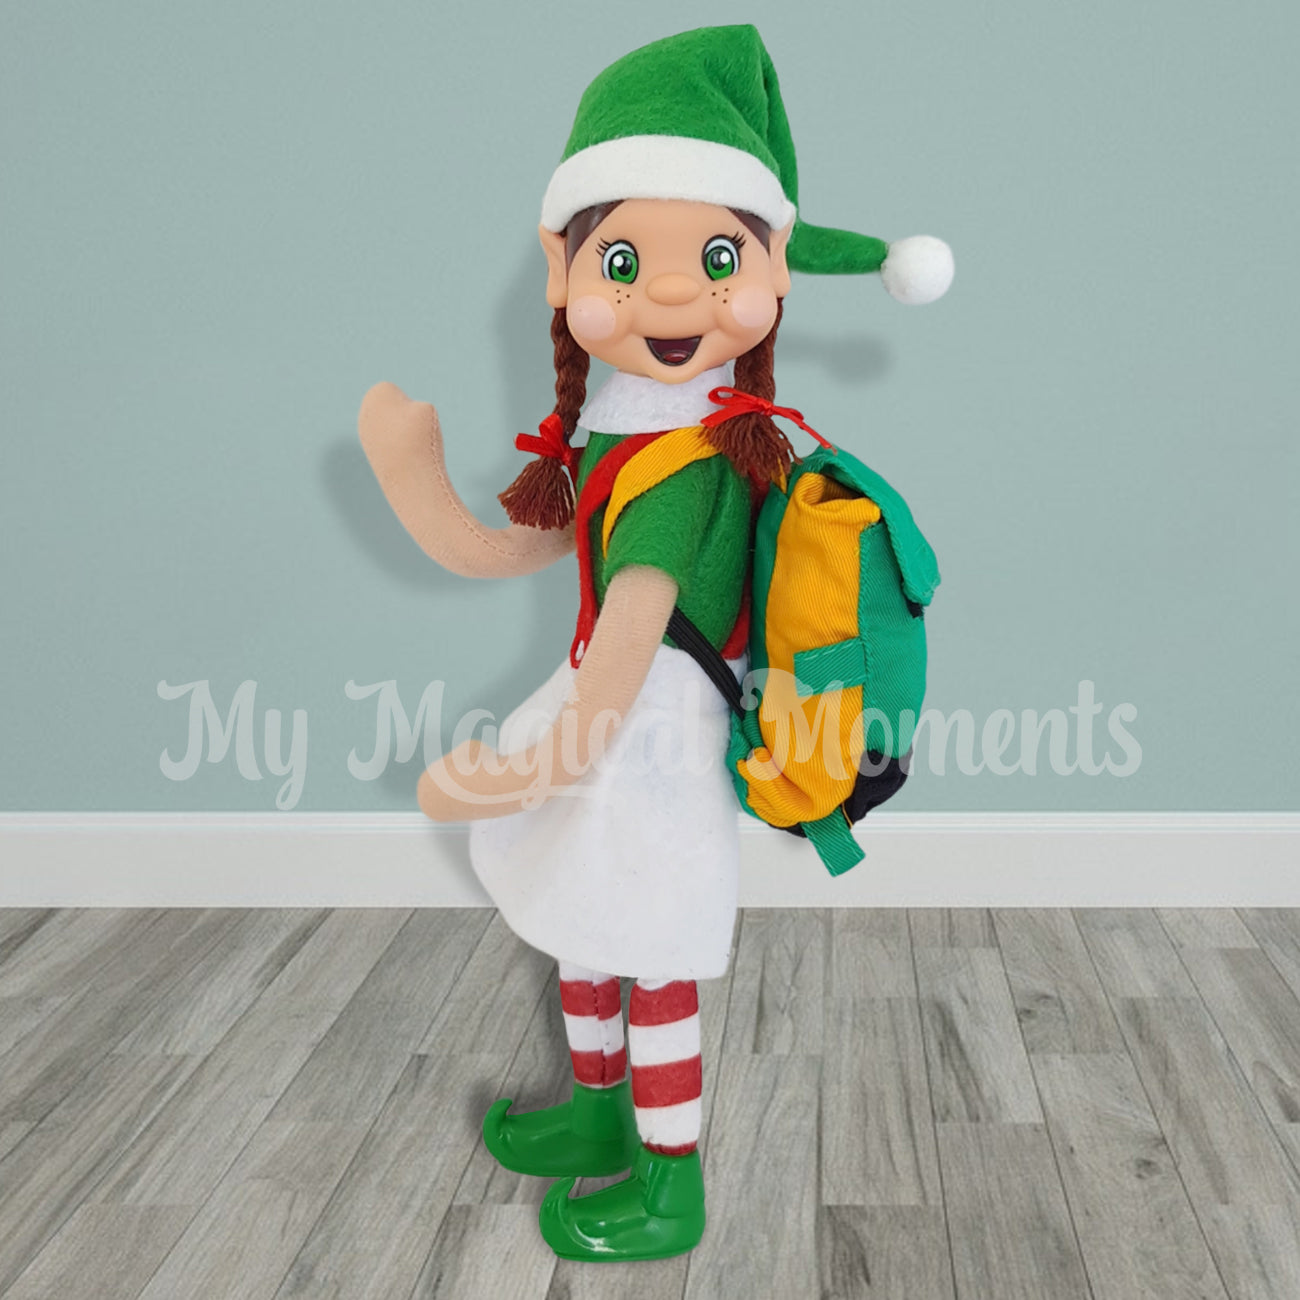 Brown hair girl elf friend standing and waving whilst wearing a green and yellow backpack